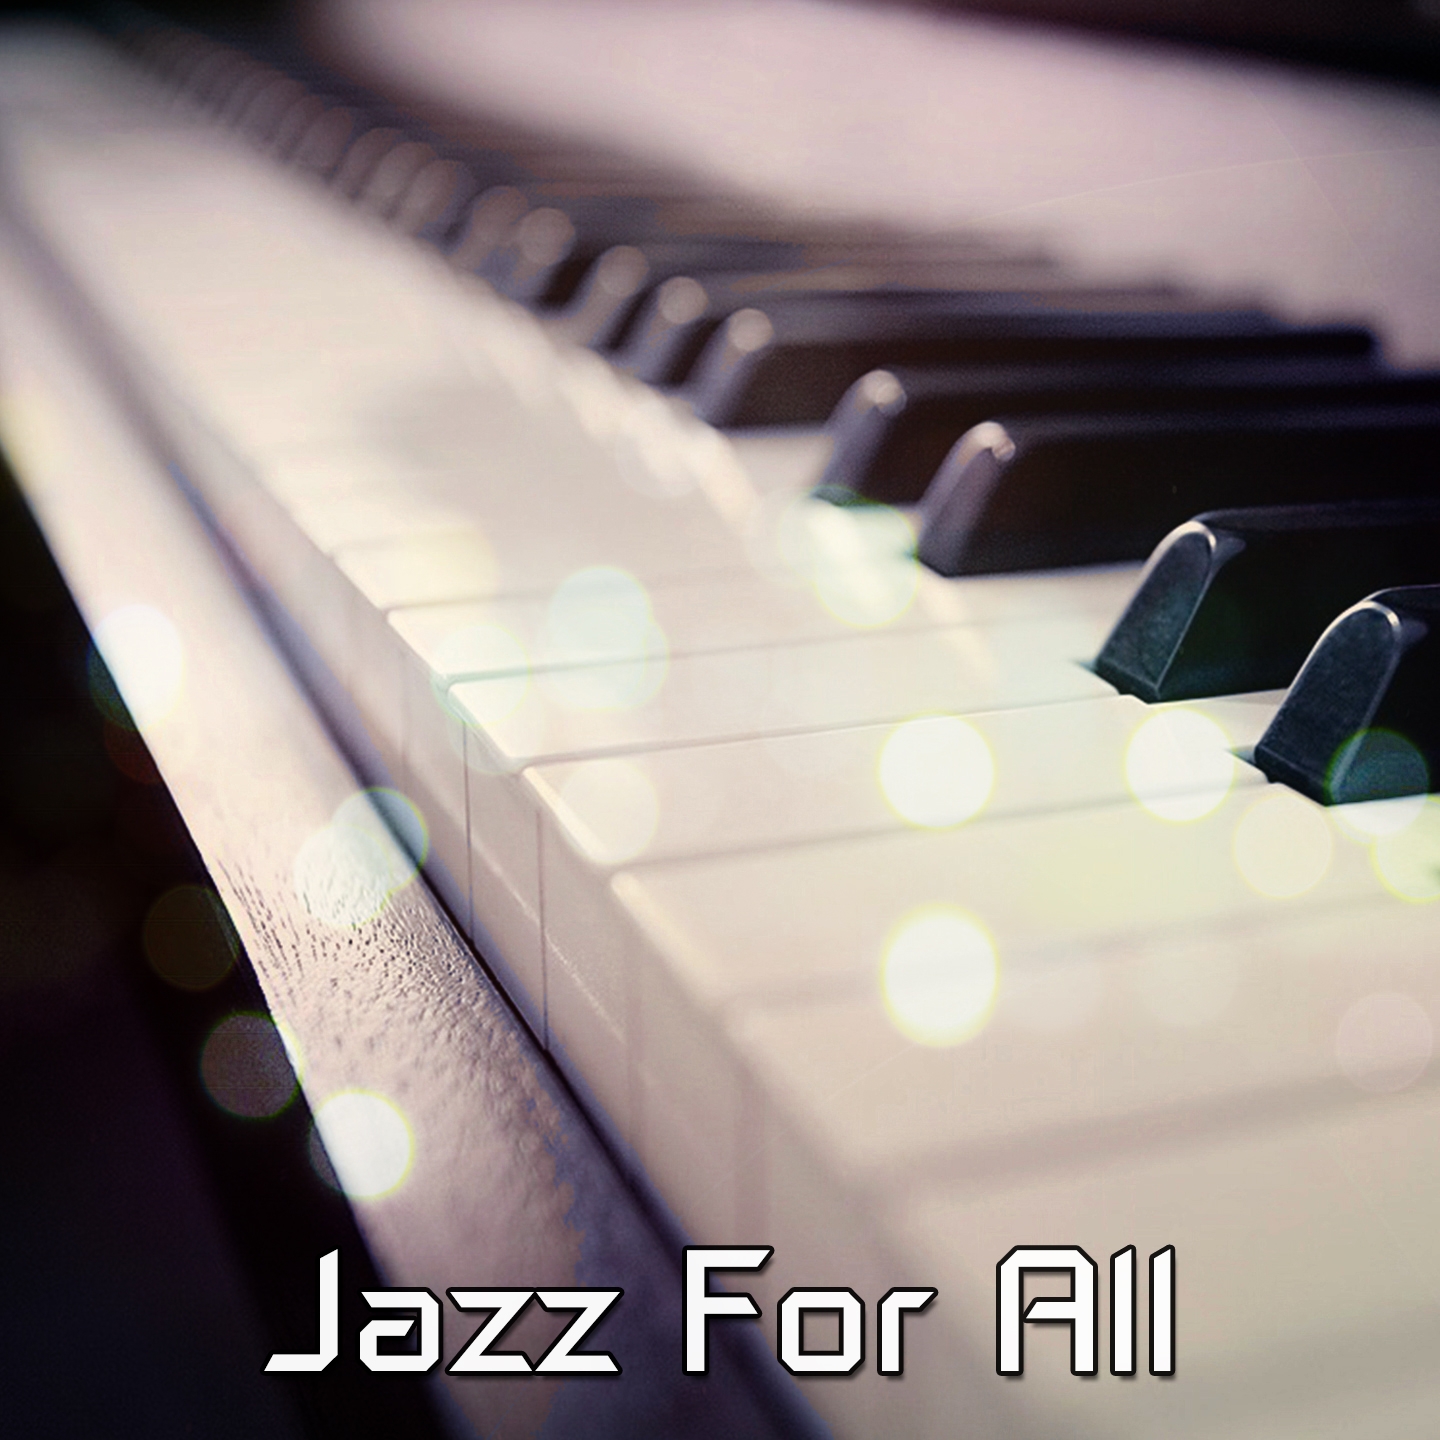 Jazz For All